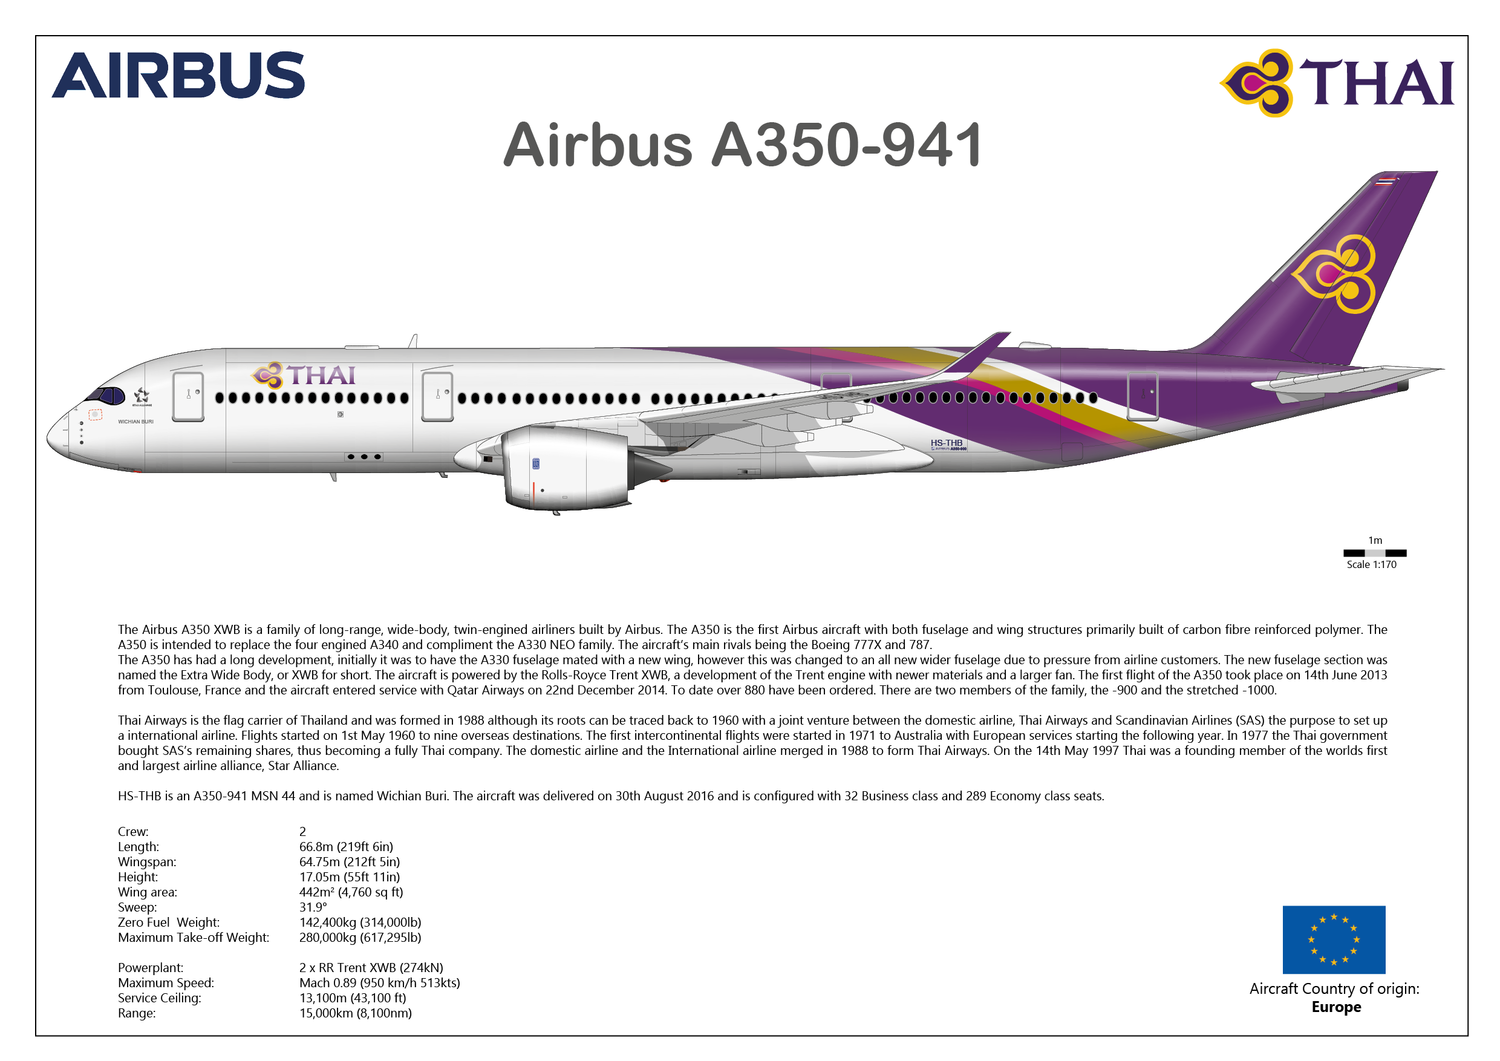 Airbus A350 HS-THB in Thai Airways livery - Digital Download